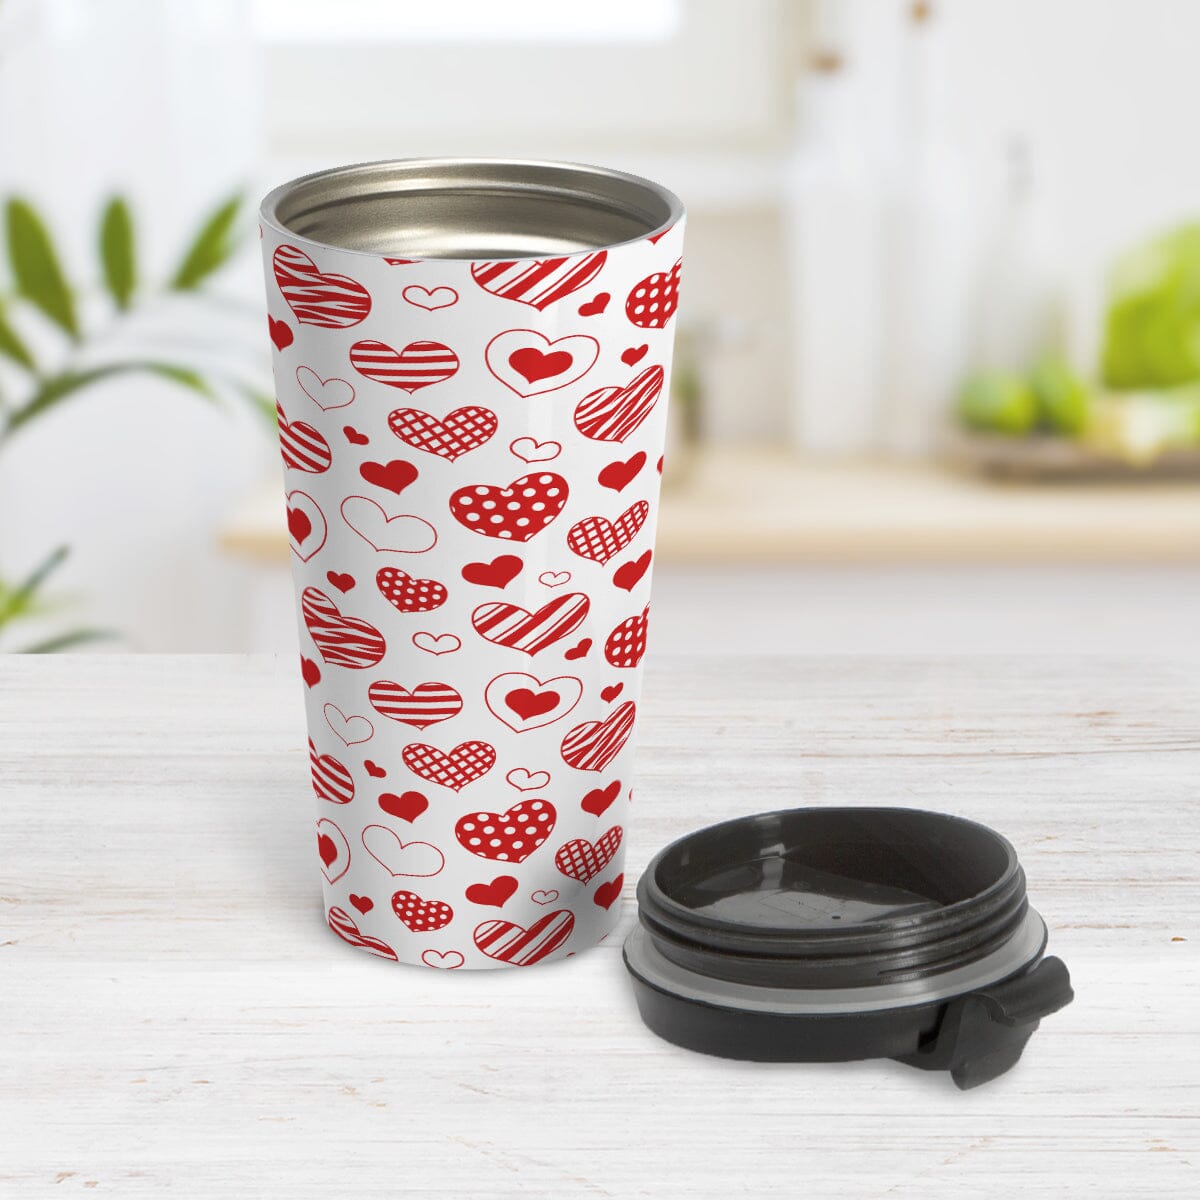 Red Heart Doodles Travel Mug (15oz) at Amy's Coffee Mugs. A stainless steel travel mug designed with hand-drawn red heart doodles in a pattern that wraps around the travel mug. This cute heart pattern is perfect for Valentine's Day or for anyone who loves hearts and young-at-heart drawings. Photo shows travel mug open with the lid on the table beside it. 